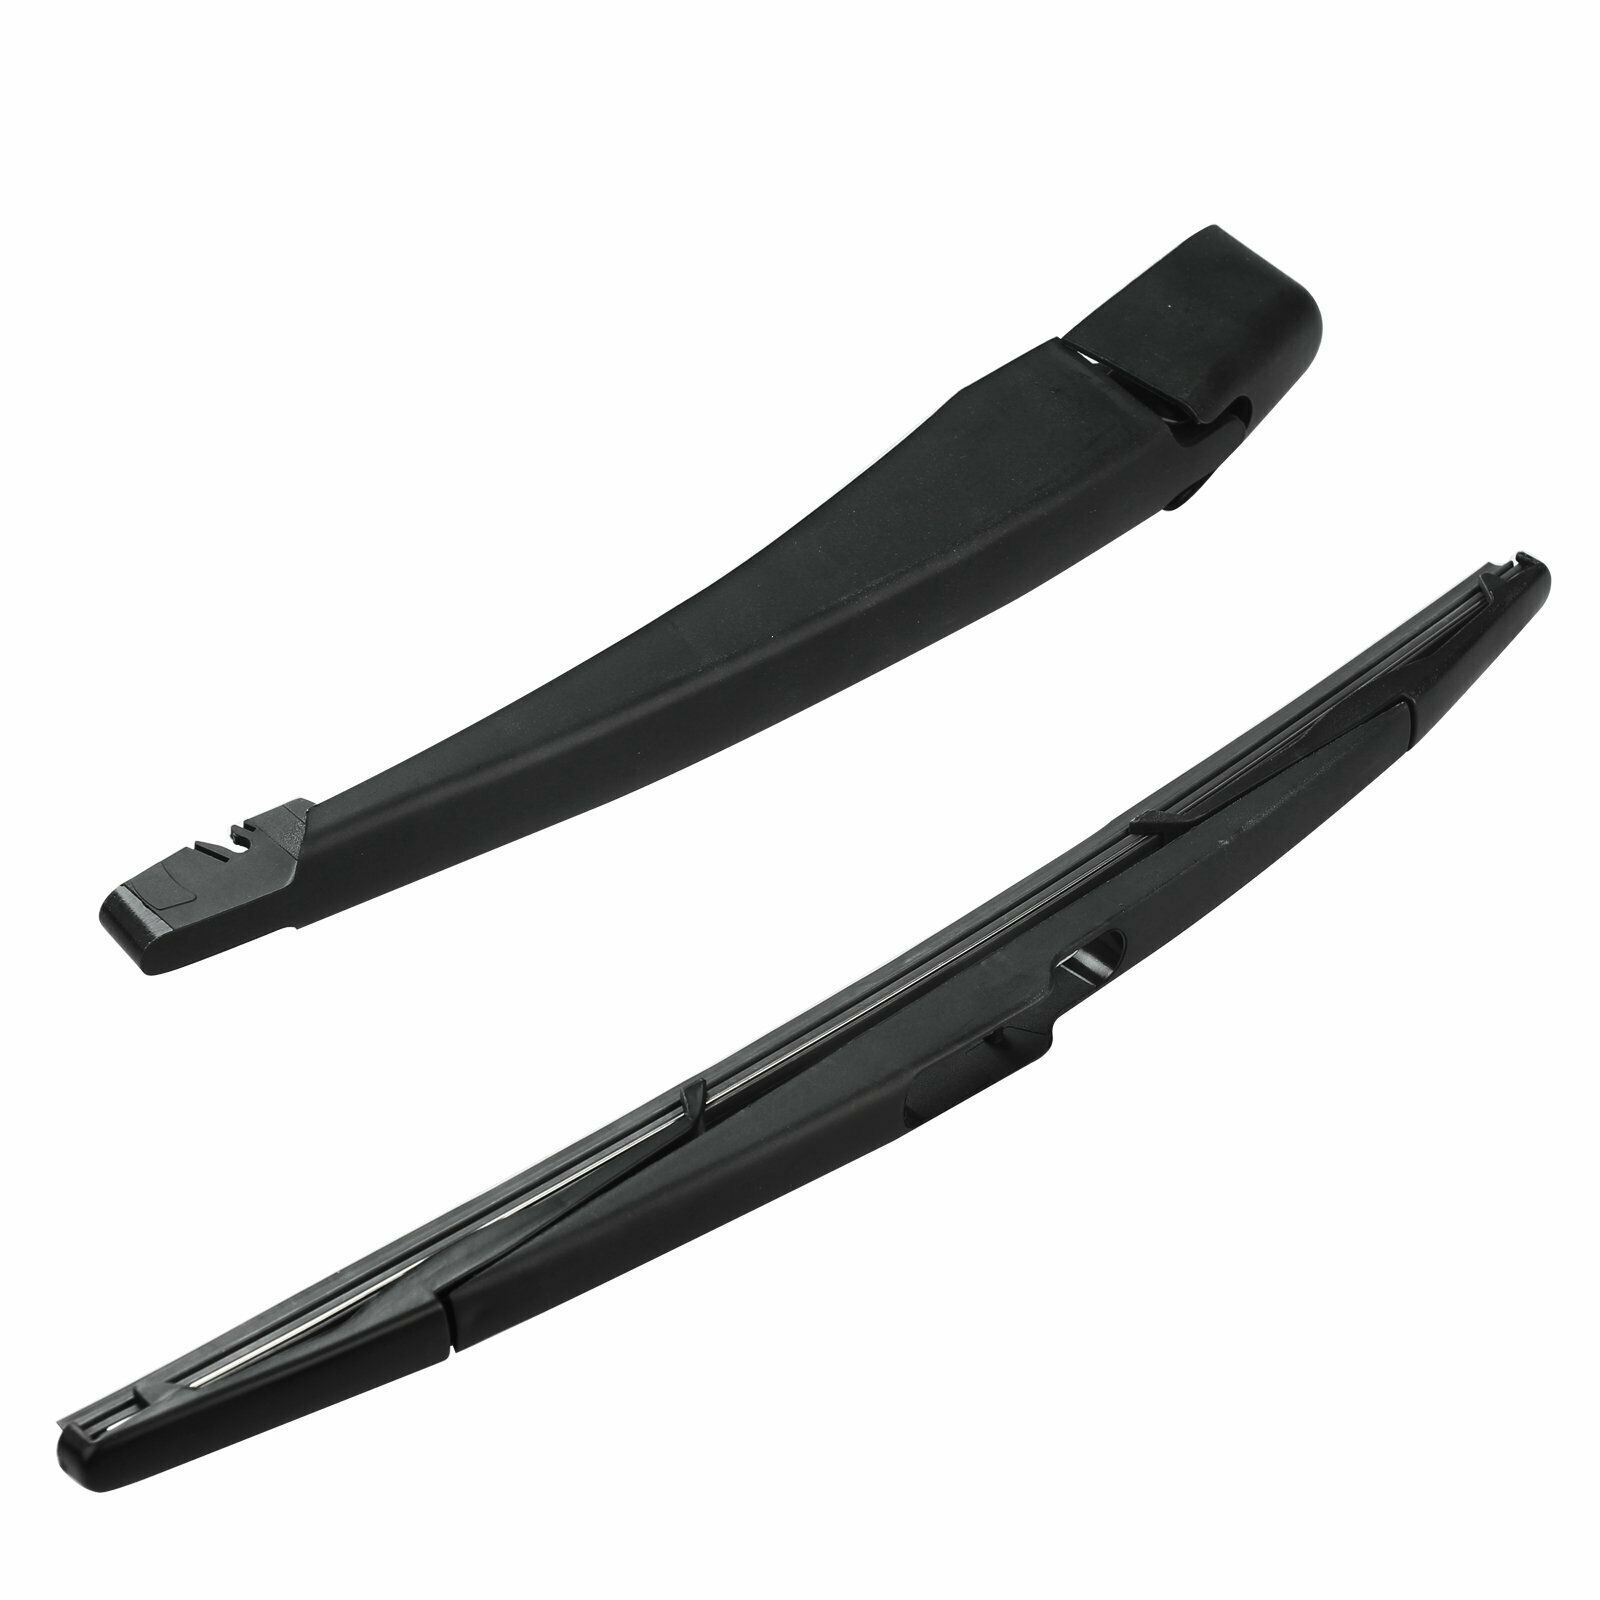 Rear Wiper Arm + Blade Set Fits Dodge Caravan Chrysler Town & Country 2008-2009 - Windshield 2011 Chrysler Town And Country Rear Wiper Blade Size